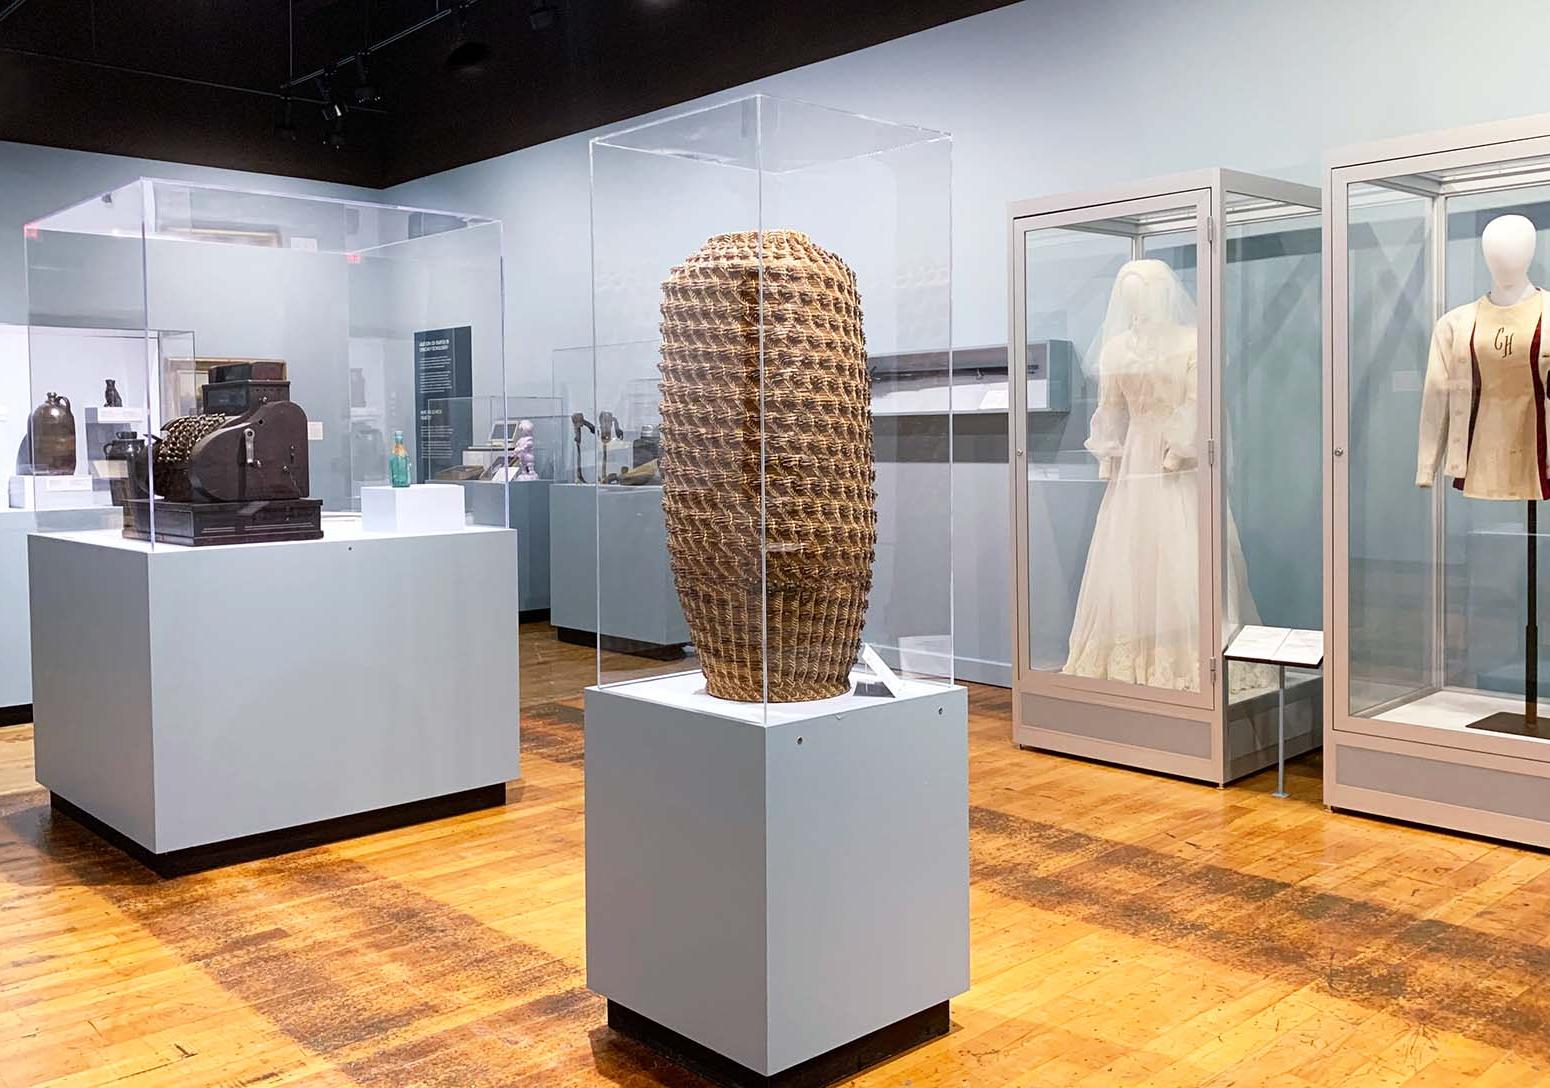 Gallery with display cases containing a large, tall narrow vase, pottery, a wedding dress and a jacket